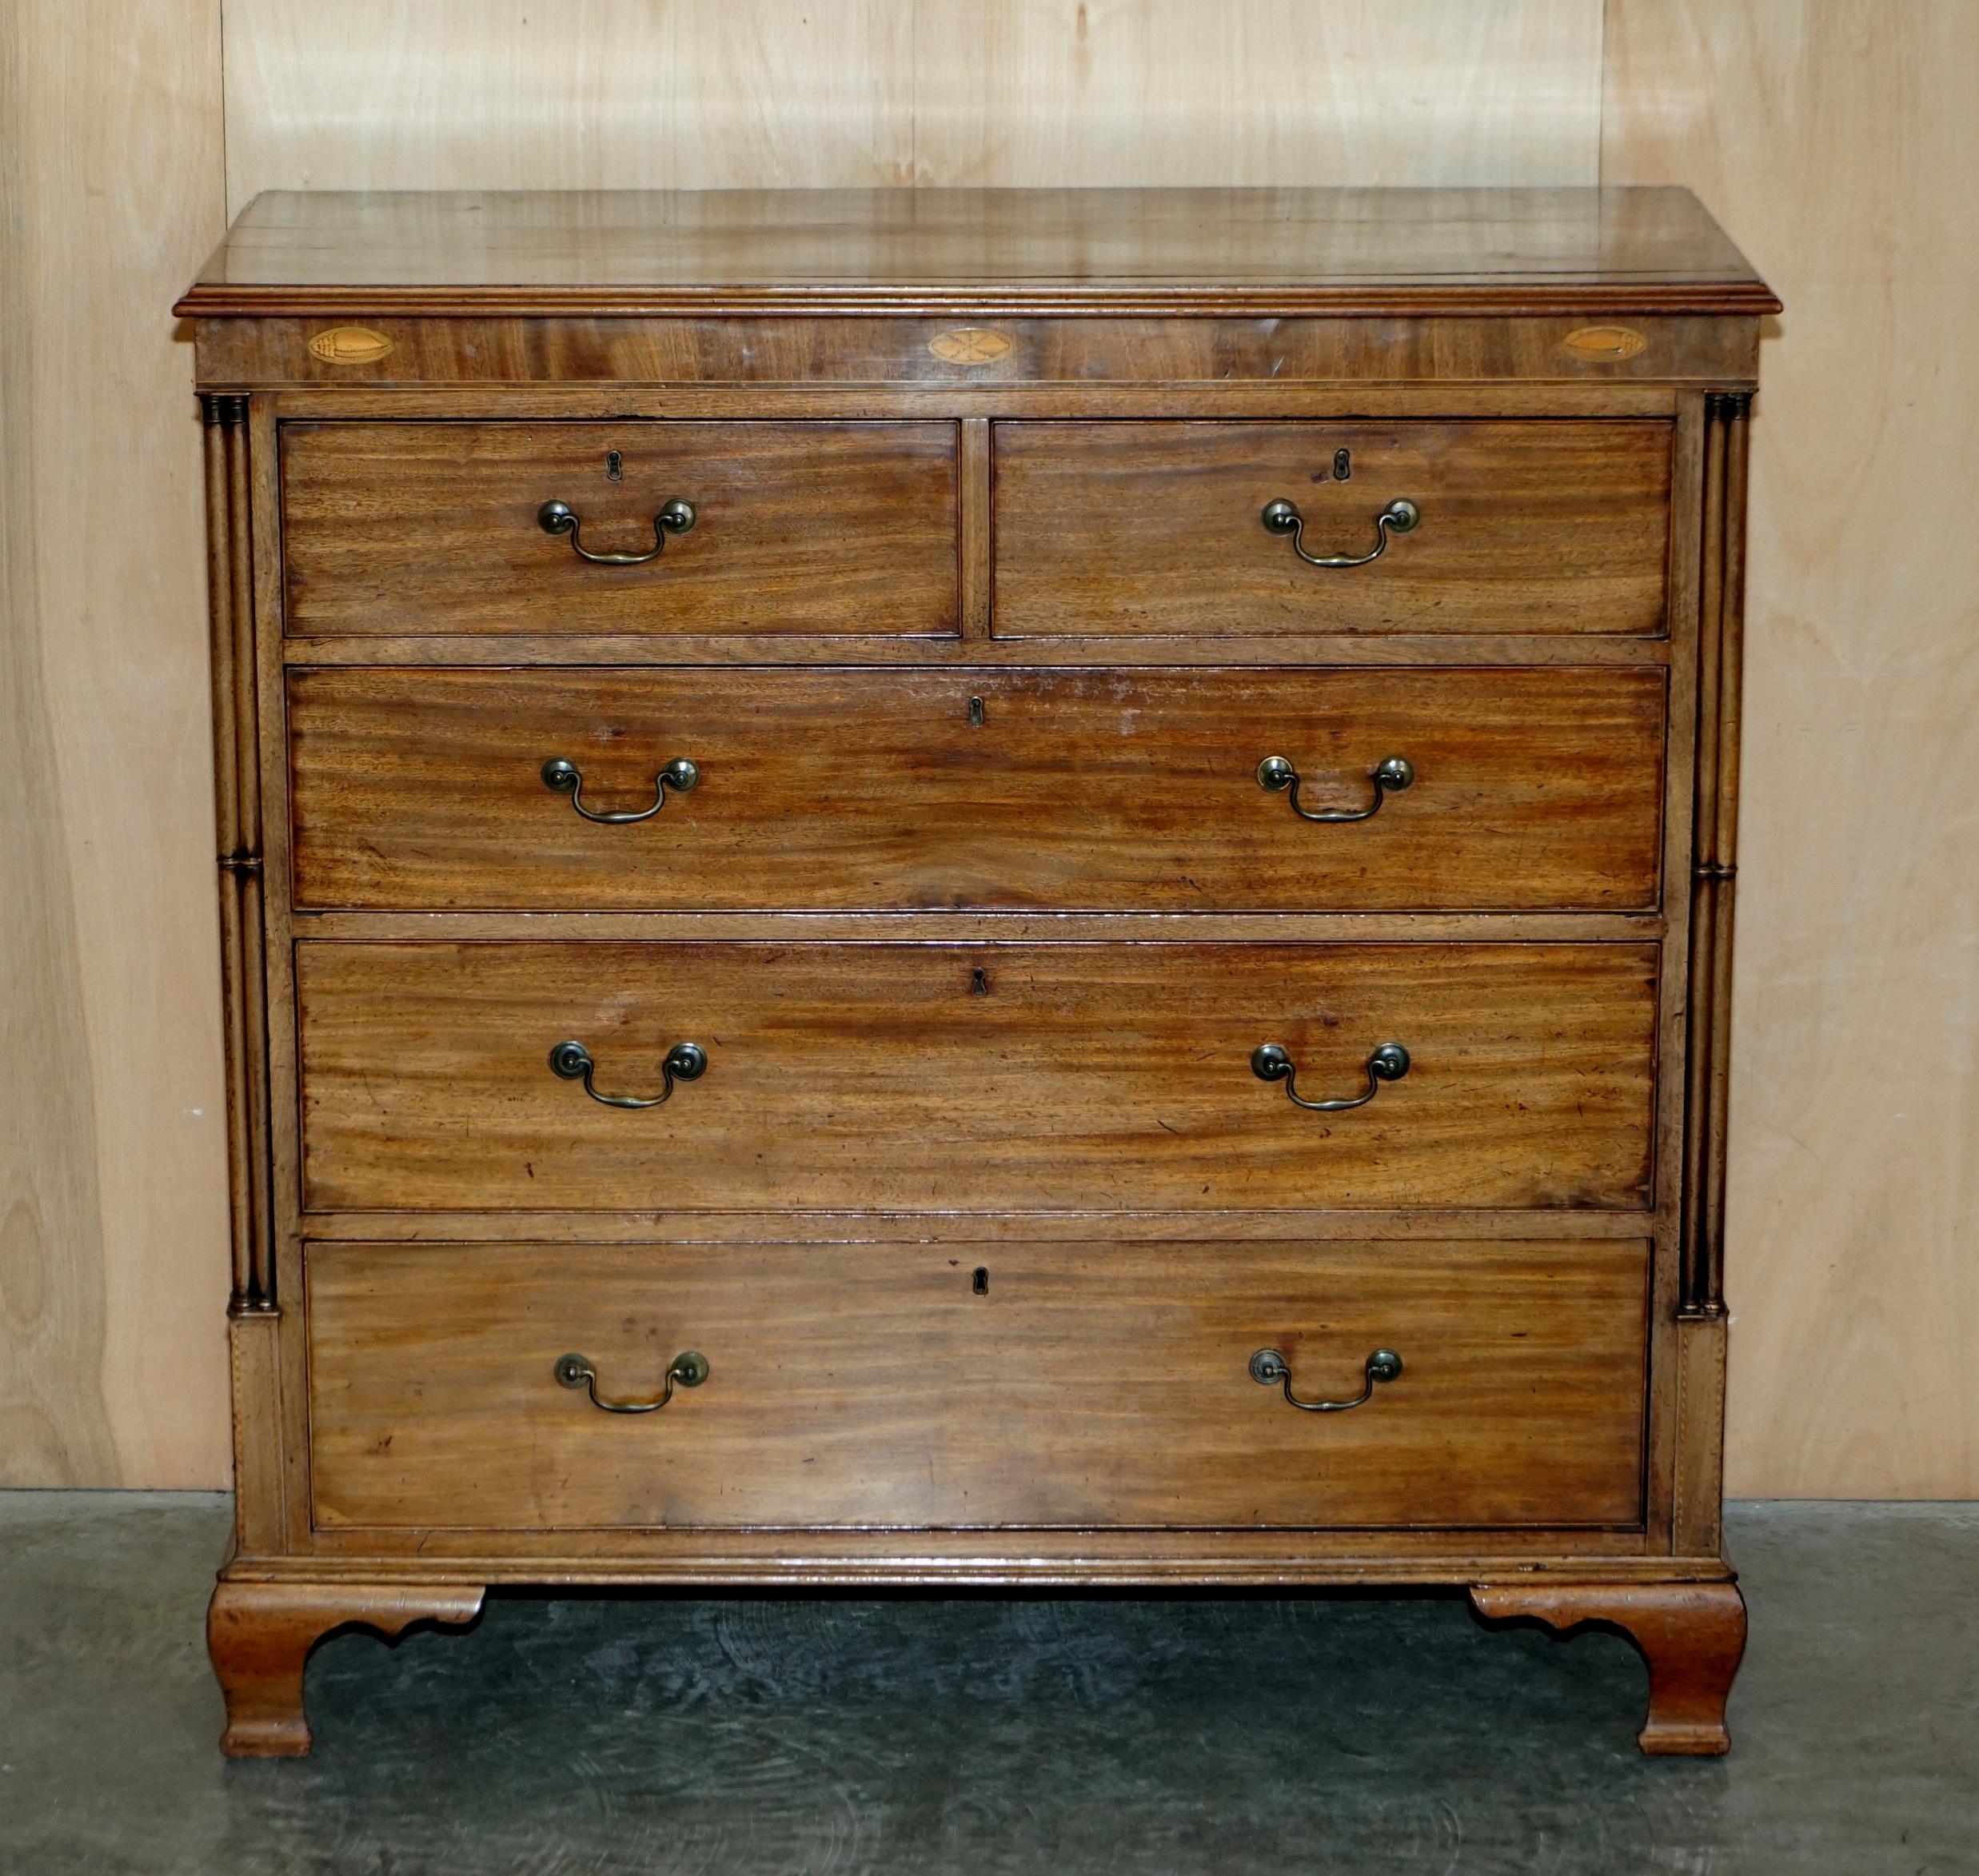 Royal House Antiques

Royal House Antiques is delighted to offer for sale this very nice circa 1860-1880 oversized mahogany chest of drawers with Thomas Chippendale cluster column pillars and Sheraton revival inlay

Please note the delivery fee